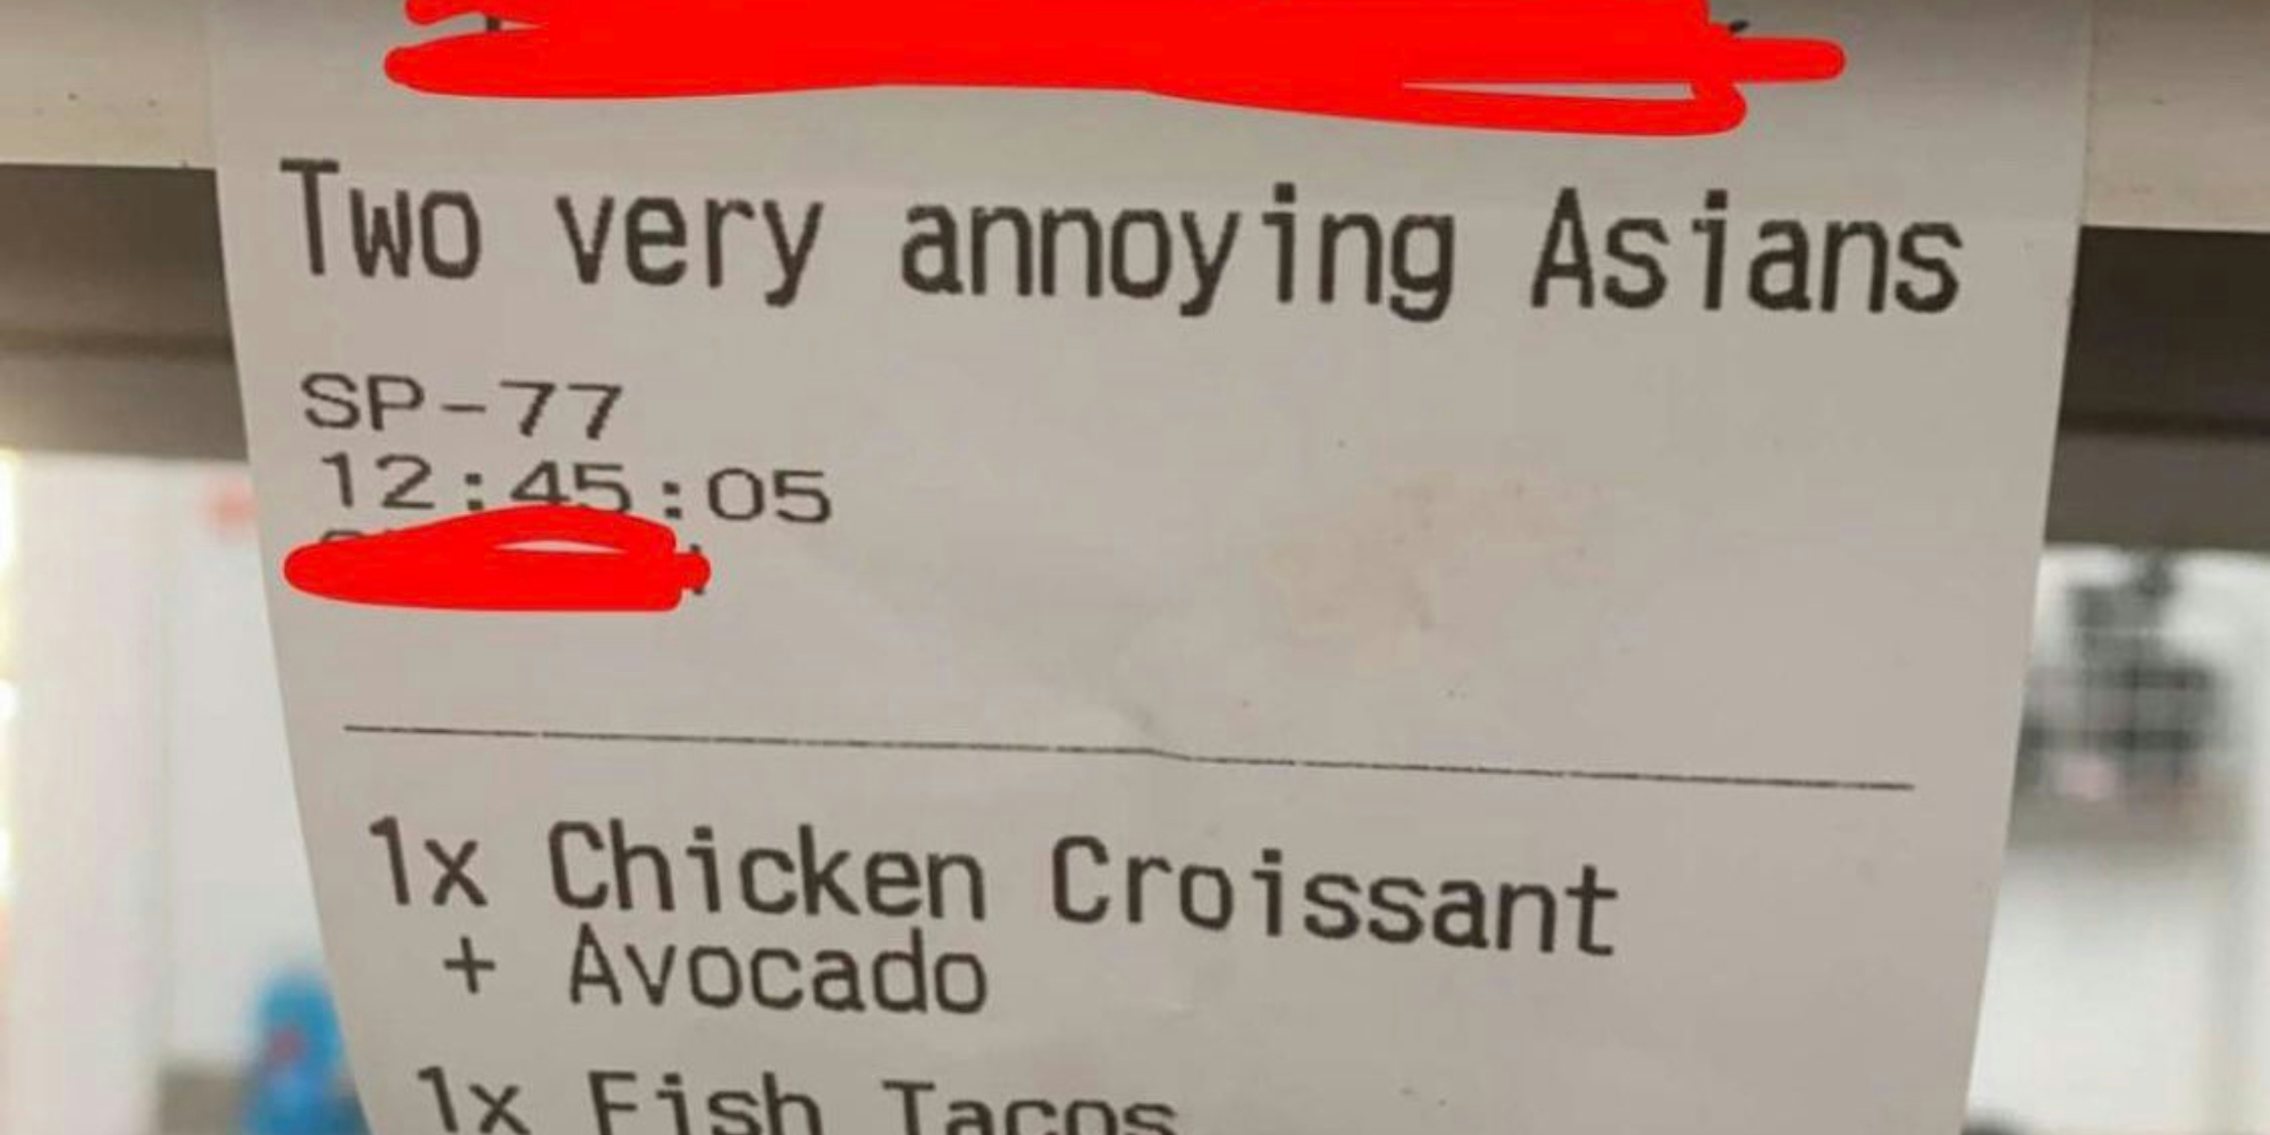 Cafe describes customers as ‘two very annoying Asians’ on receipt